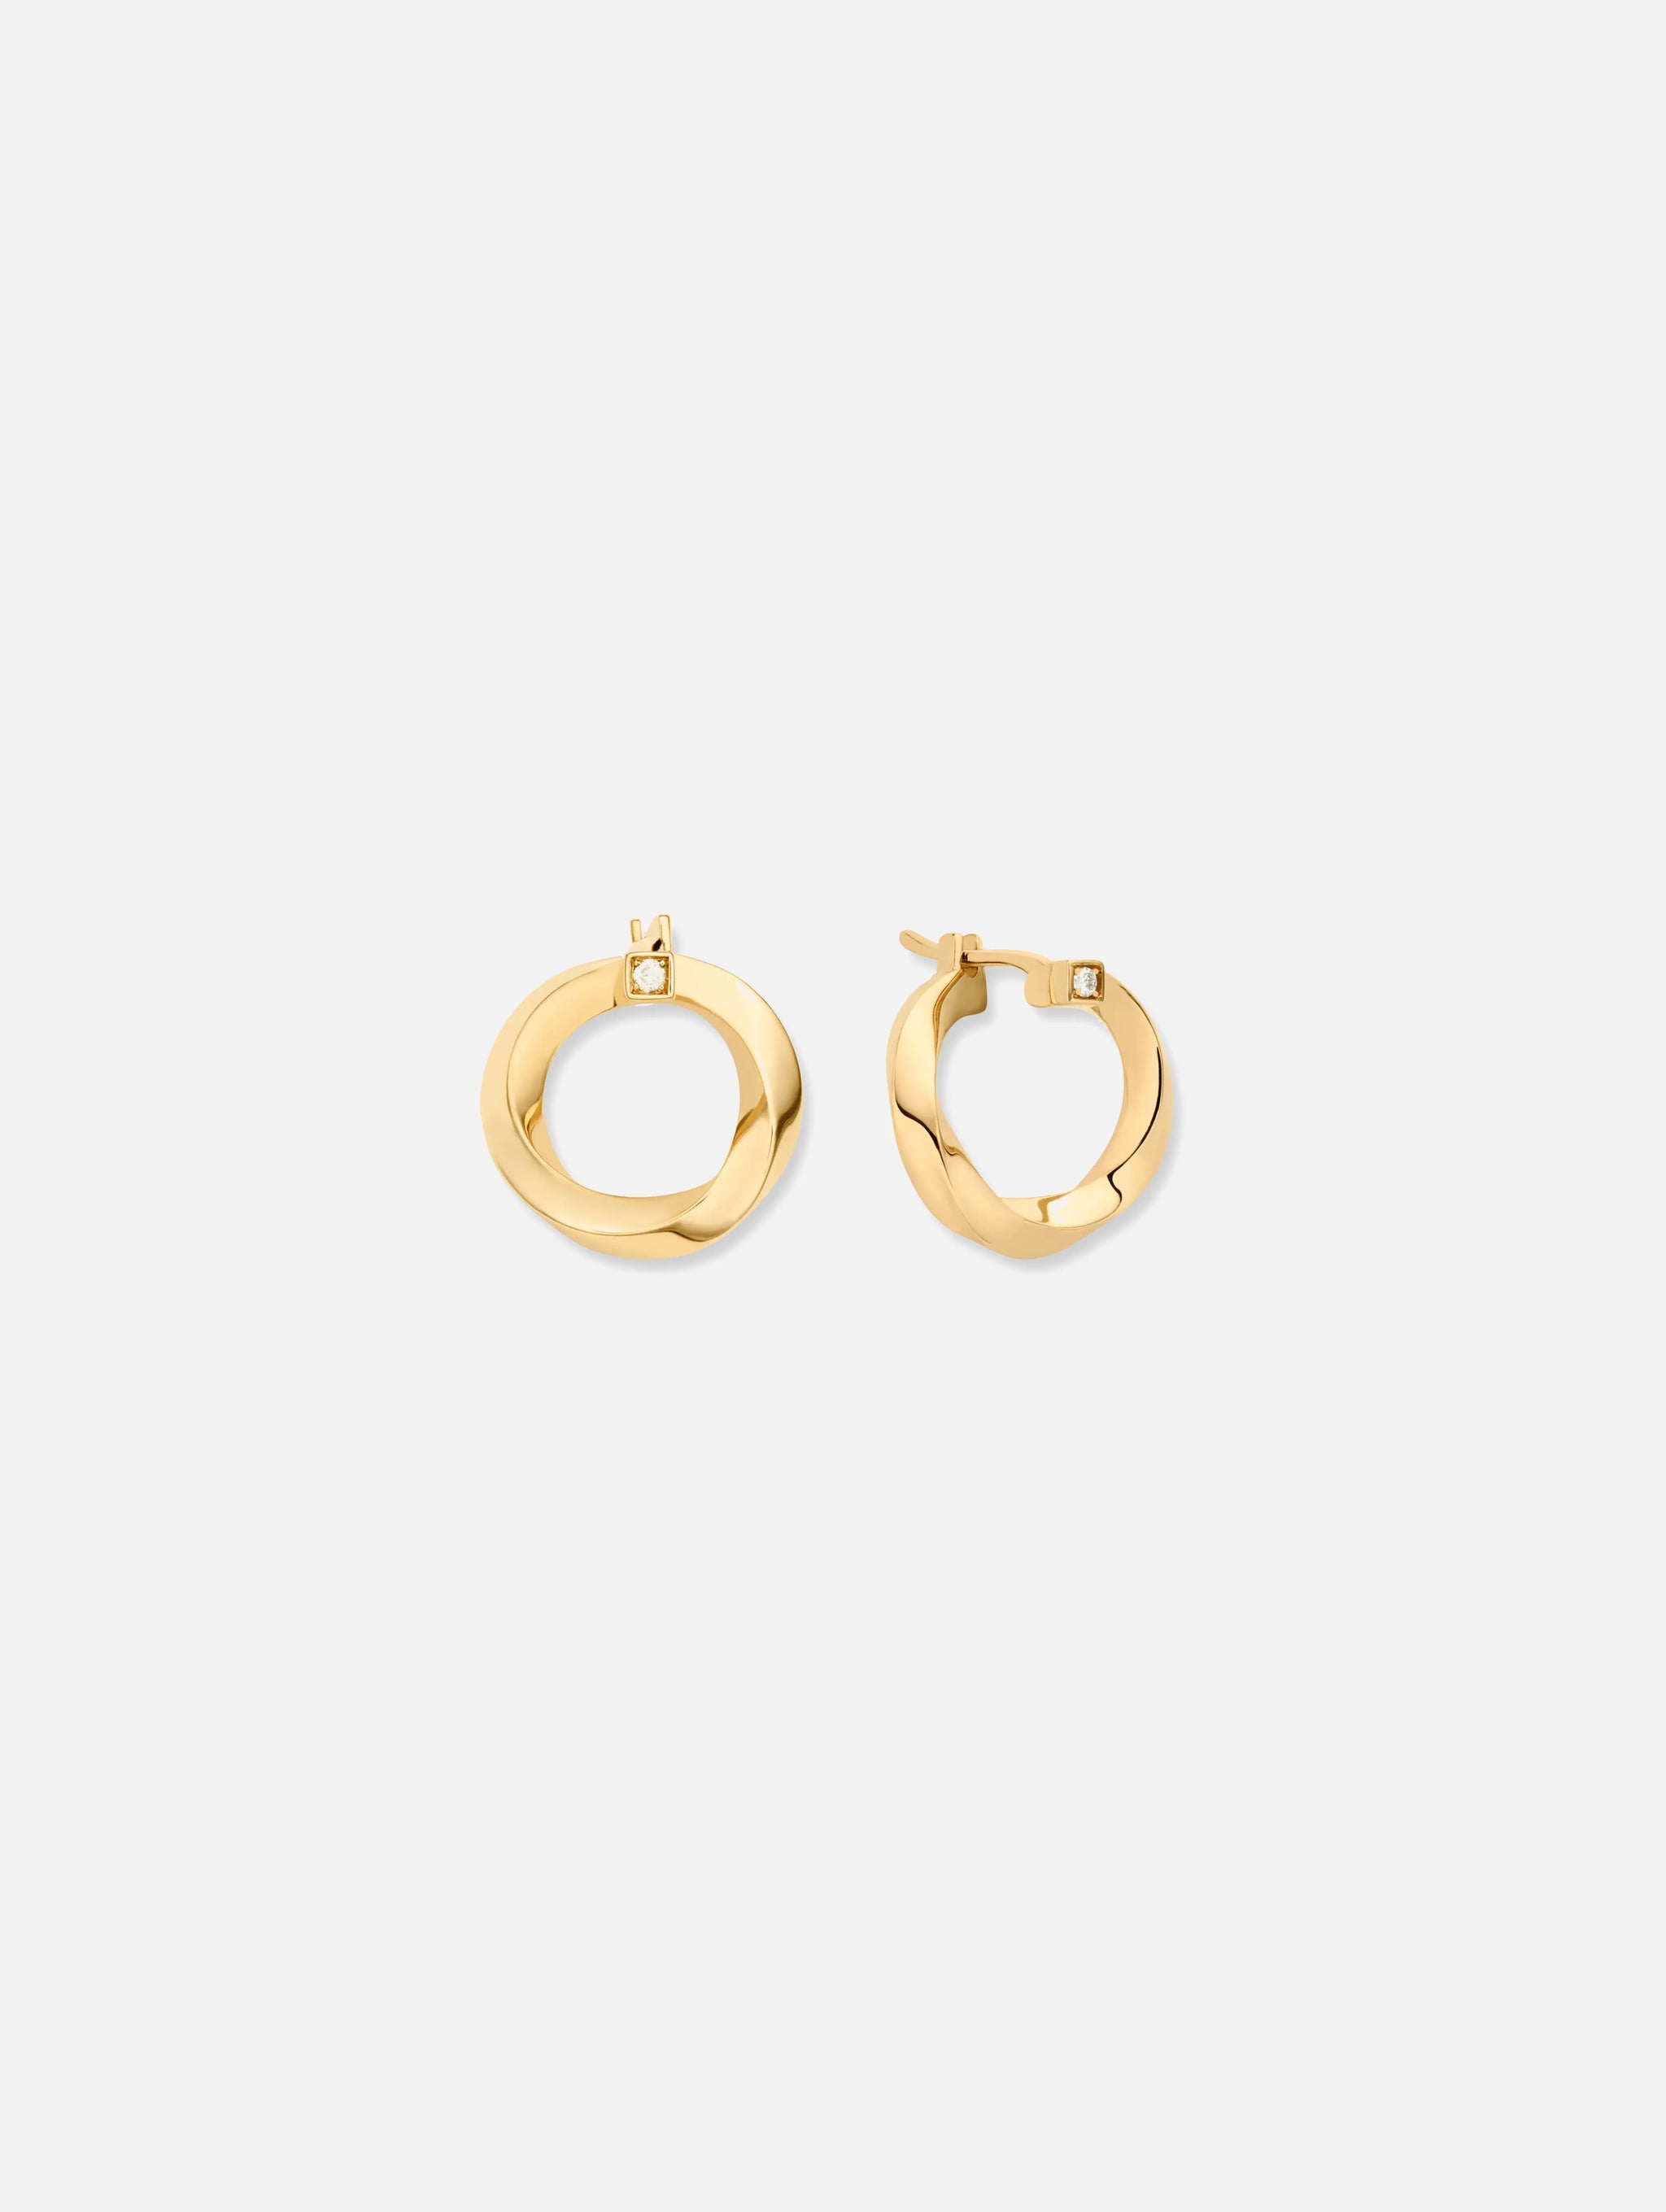 Gold Thread Earrings in Yellow Gold - Nouvel Heritage - Nouvel Heritage